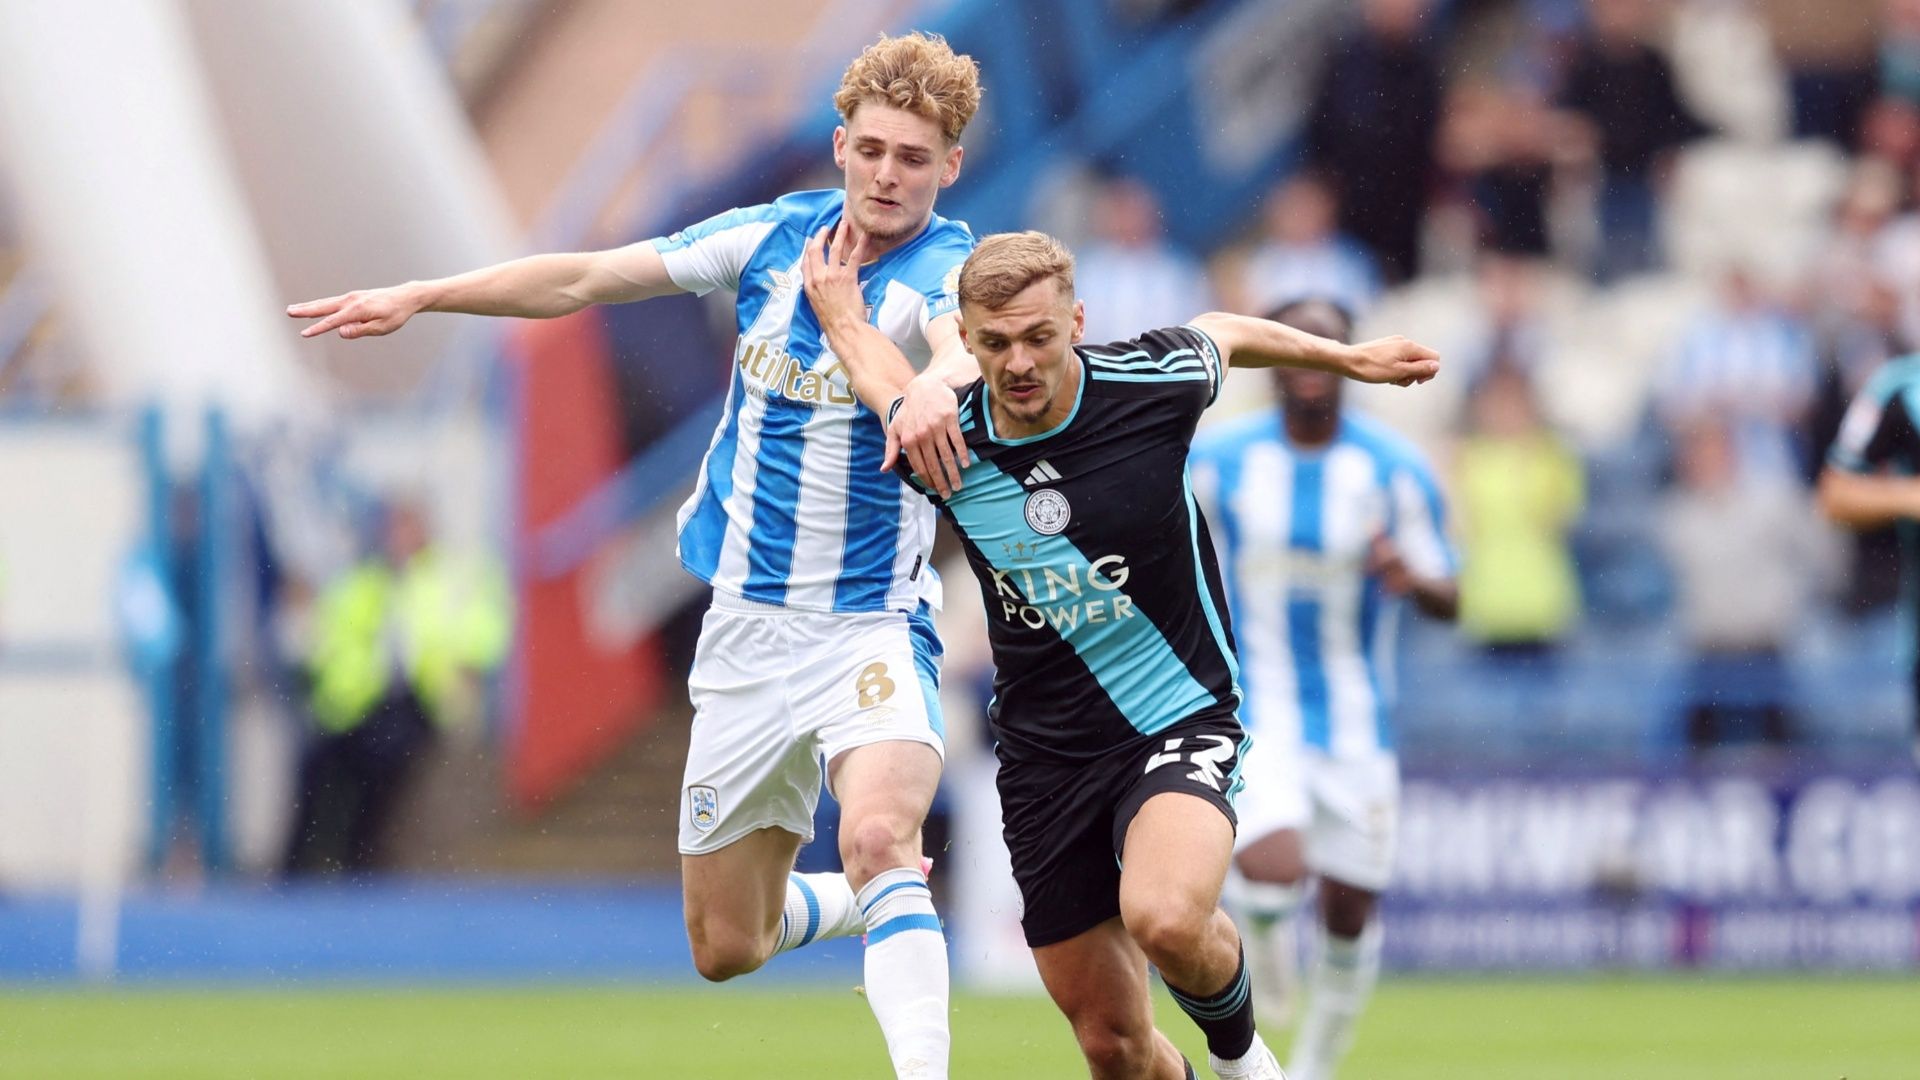 Championship - Huddersfield Town v Leicester City